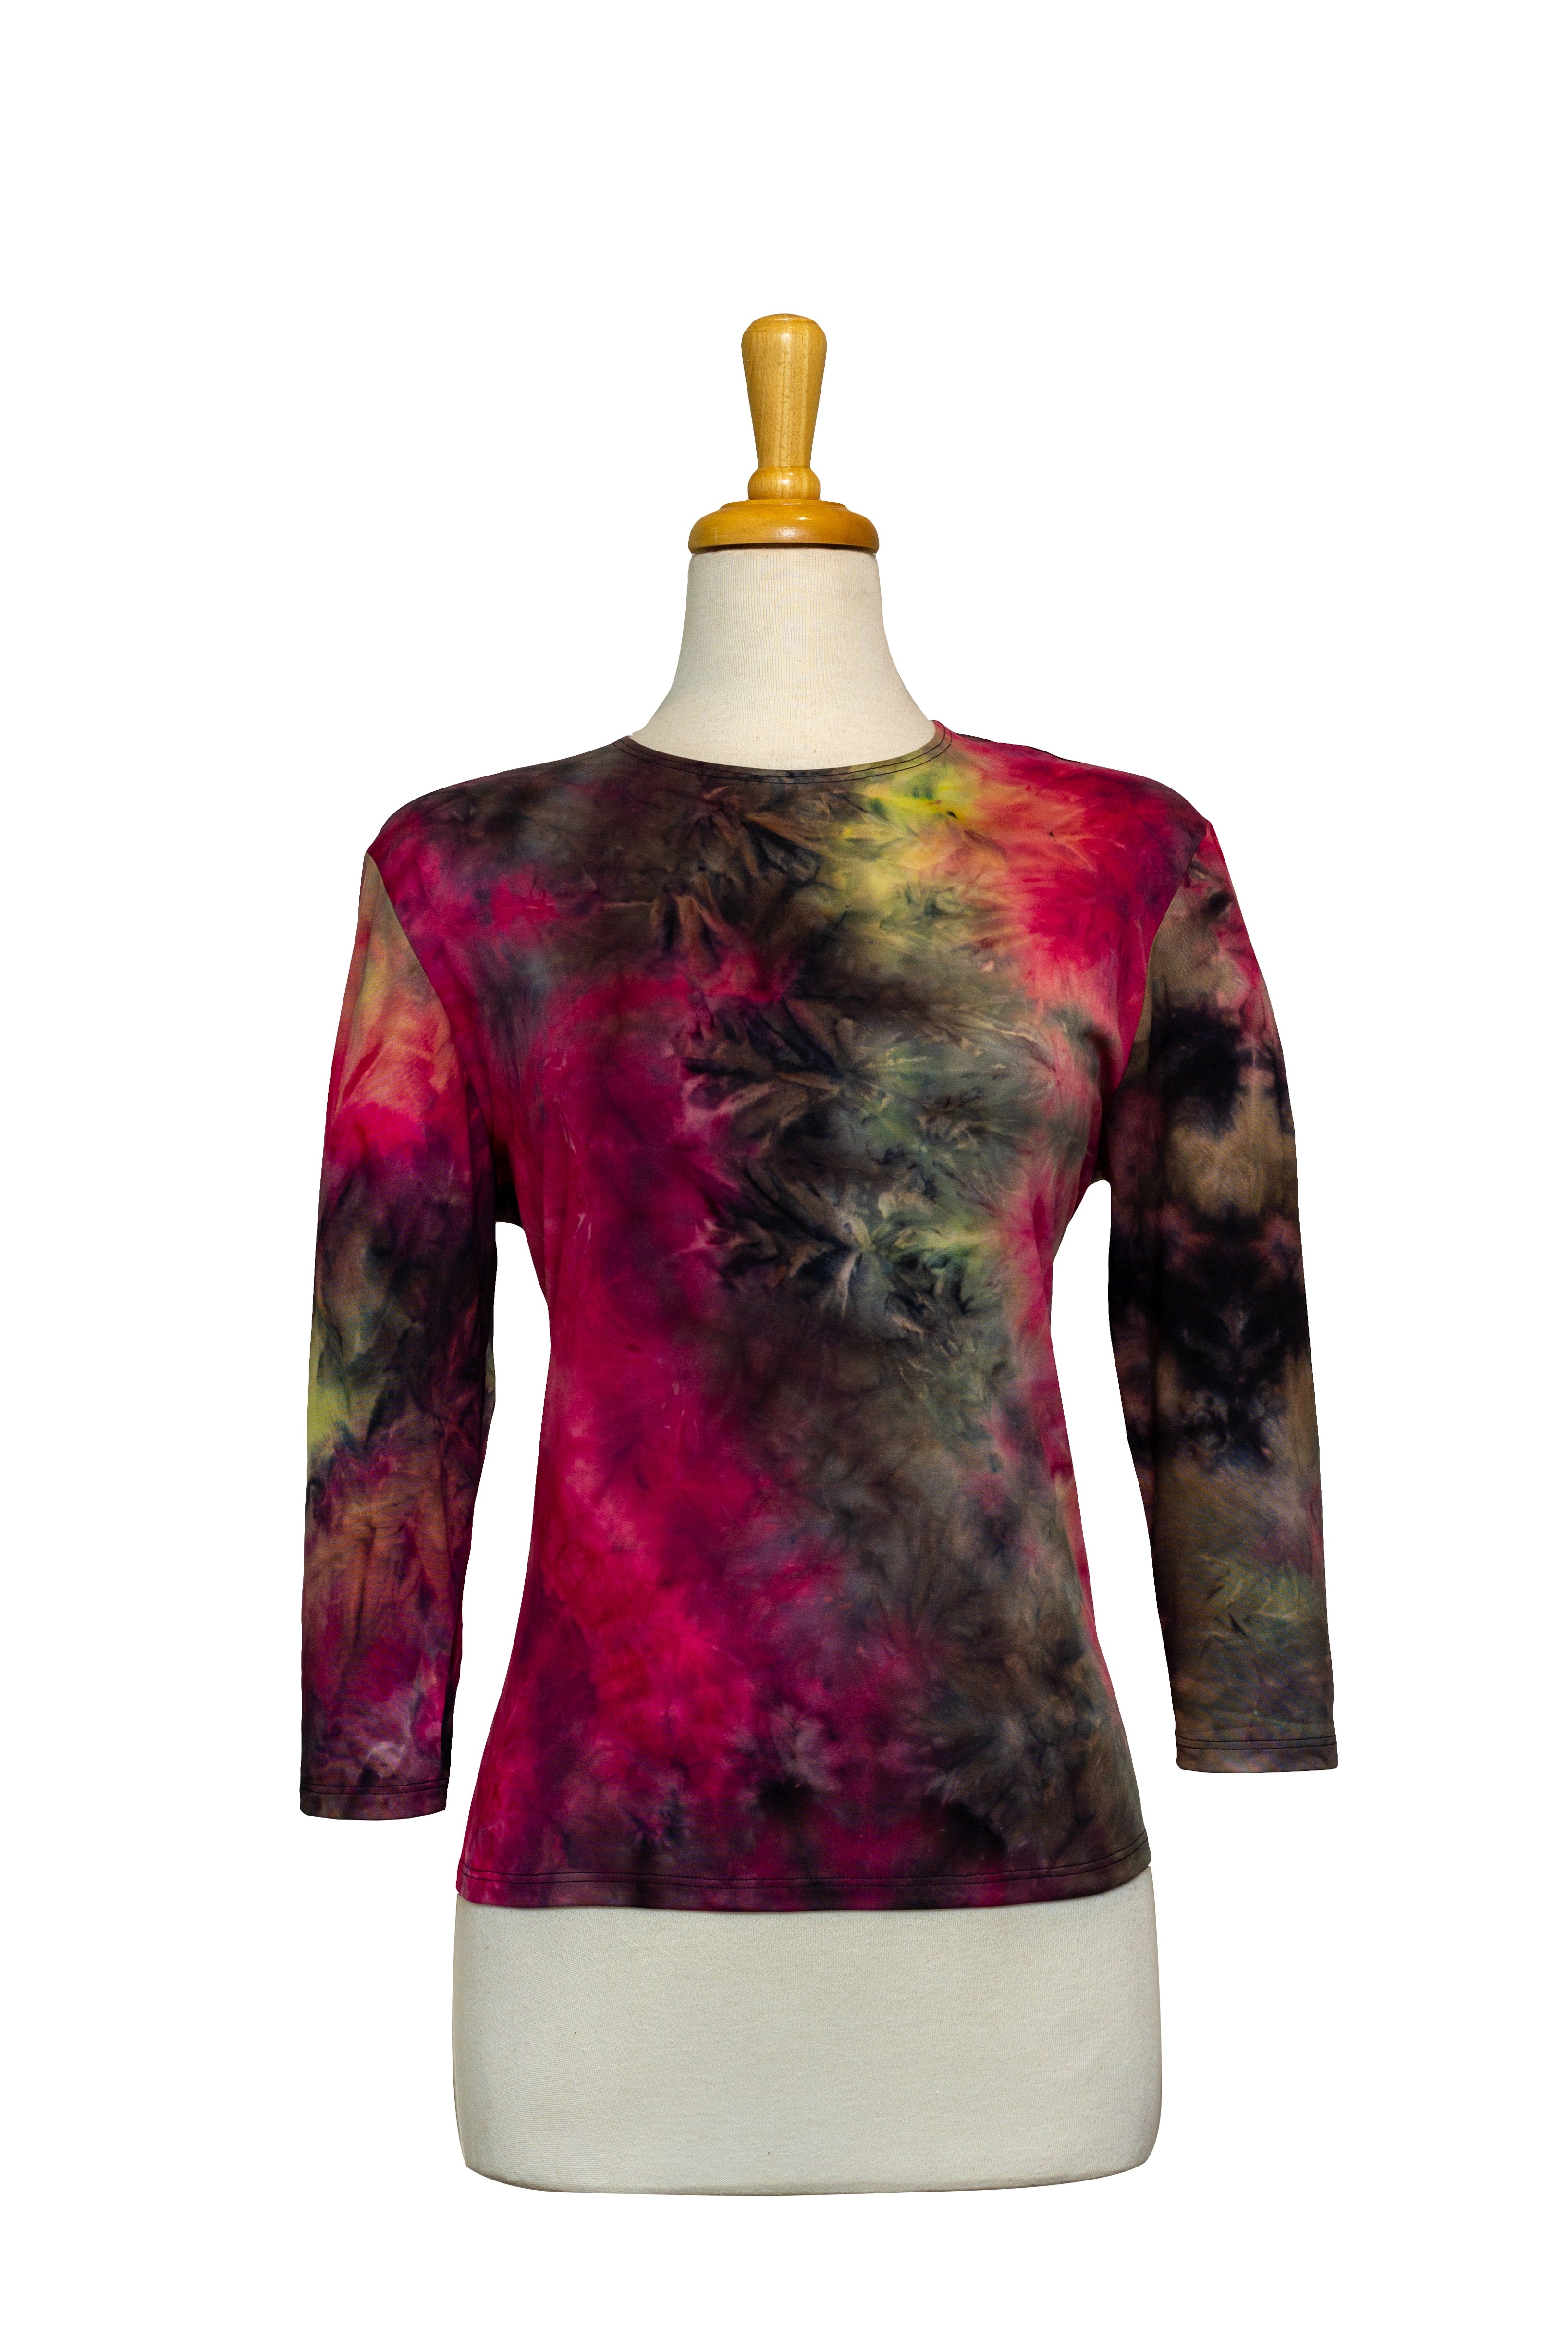 Charcoal and Fuchsia Tie Dye Cotton 3/4 Sleeve Top 